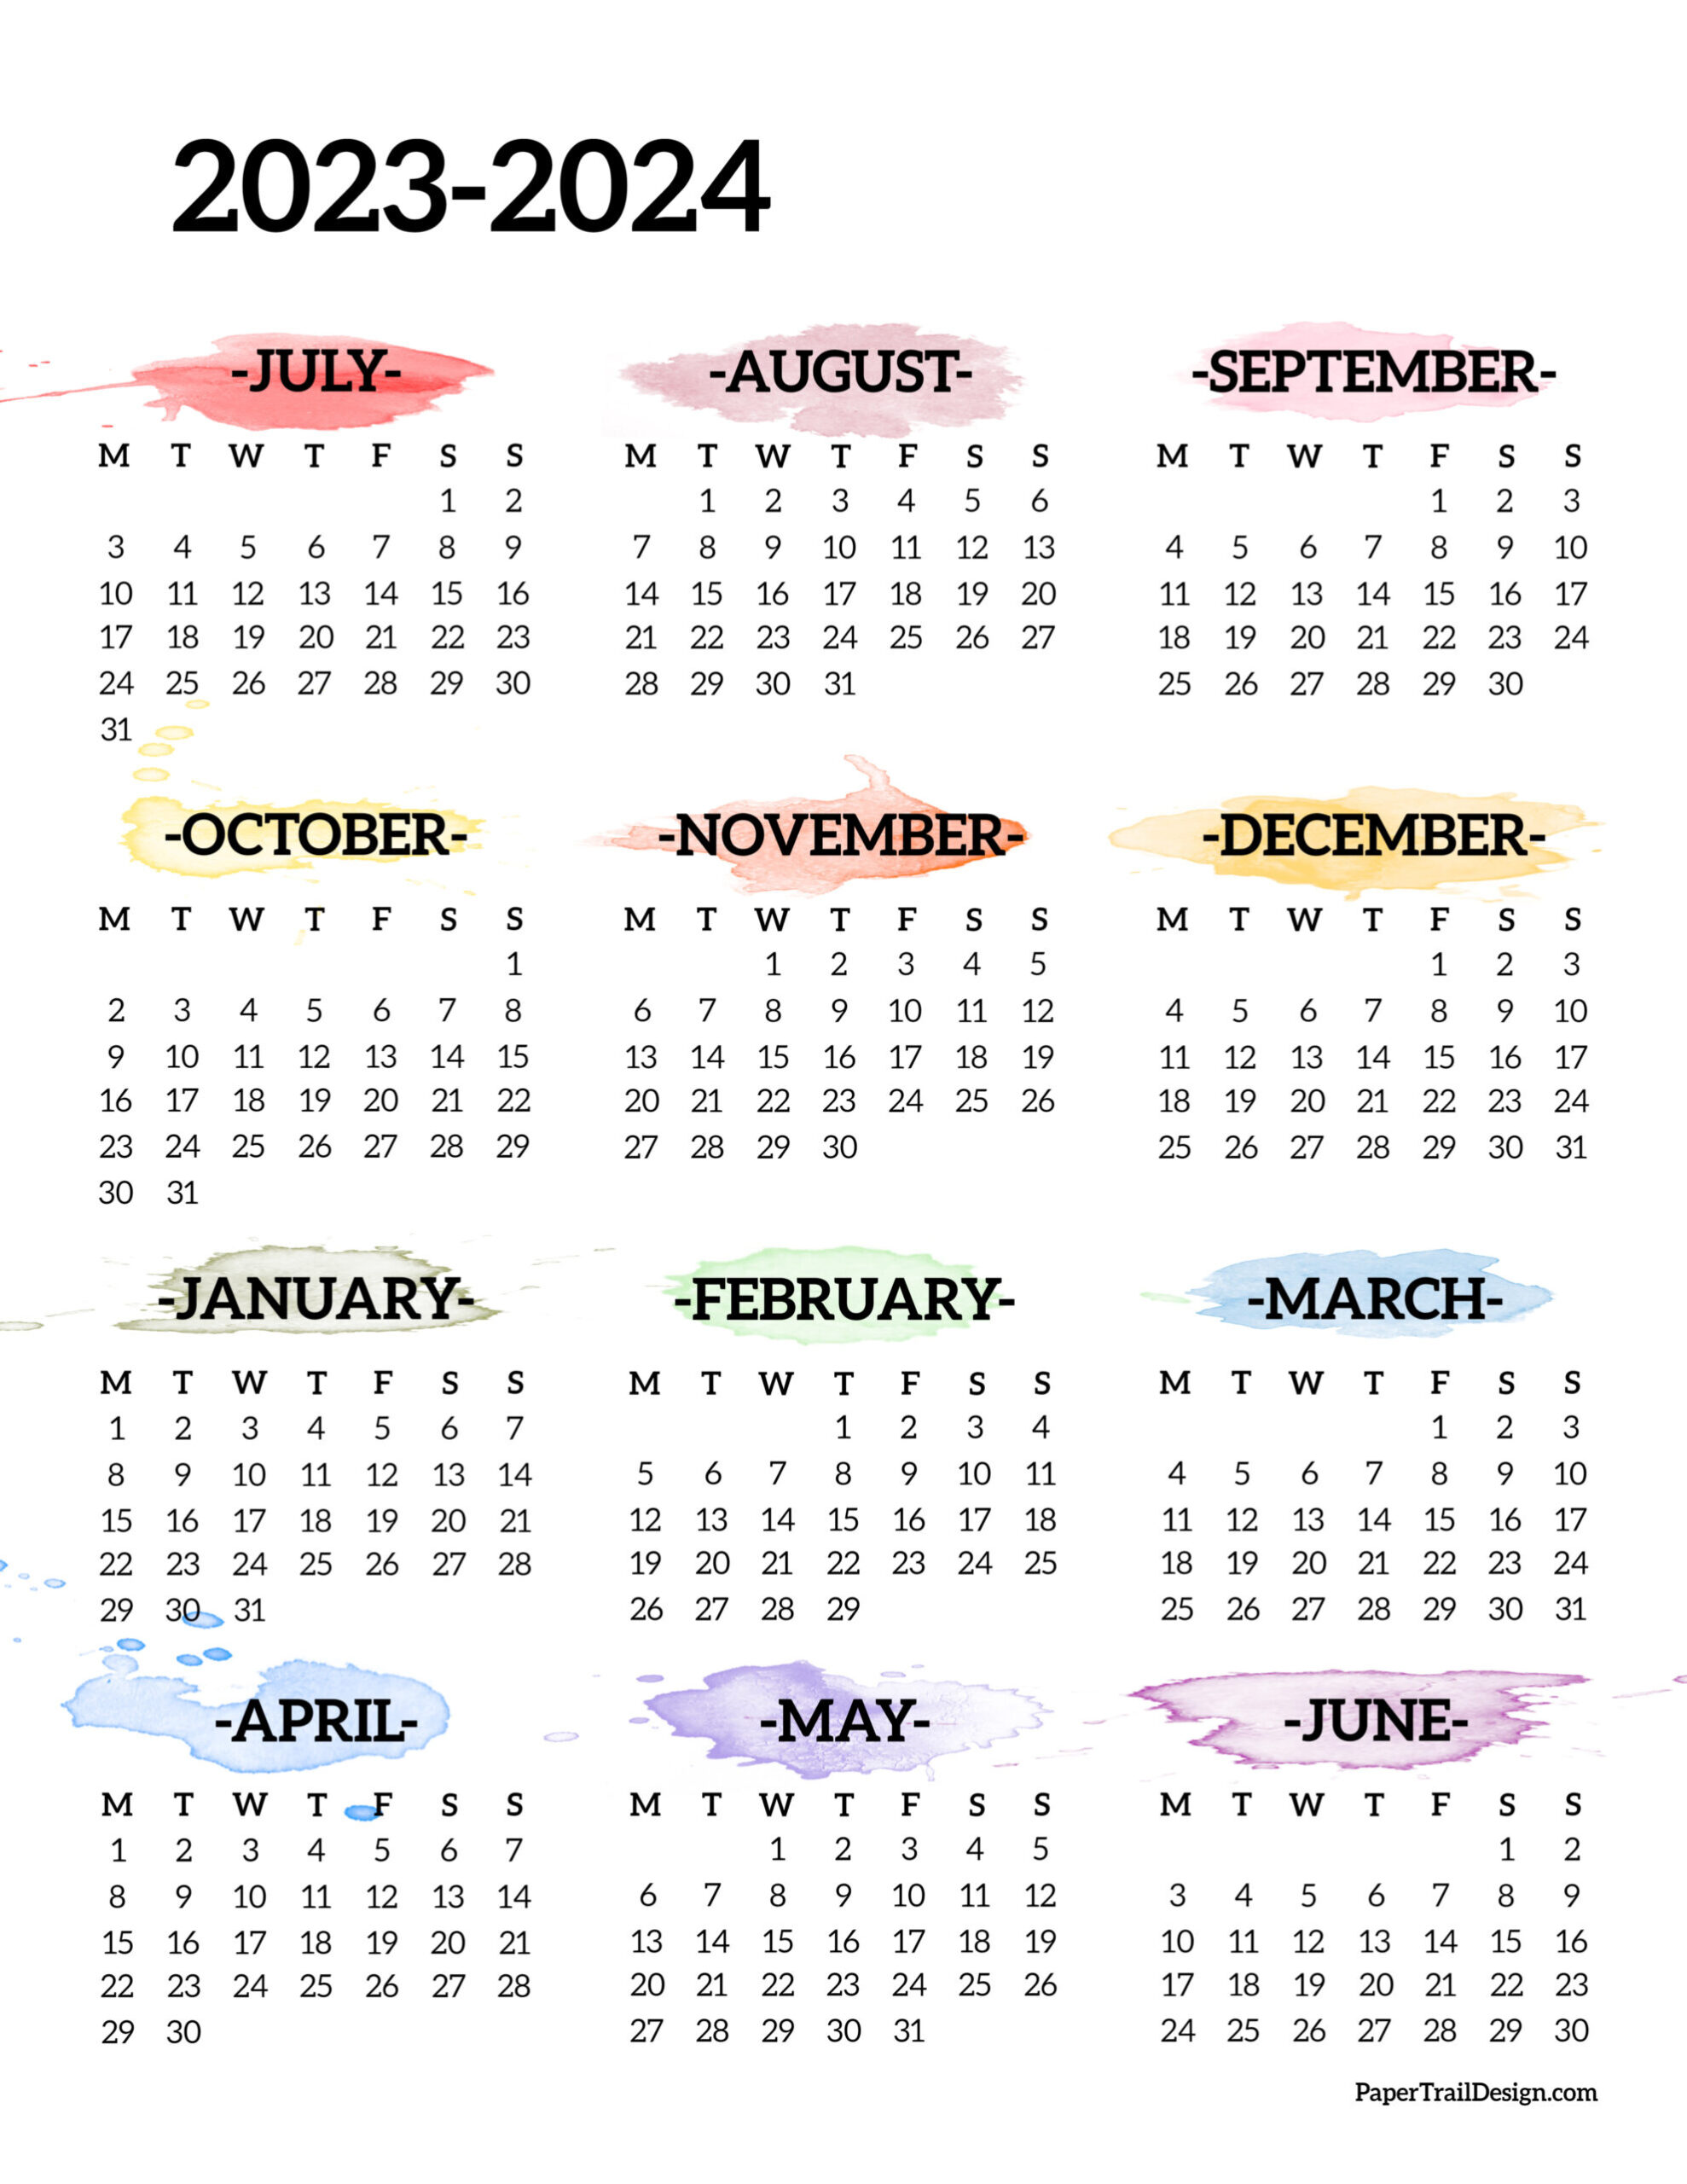 2023-2024 School Year Calendar Free Printable - Paper Trail Design pertaining to July 2023 Calendar To June 2024